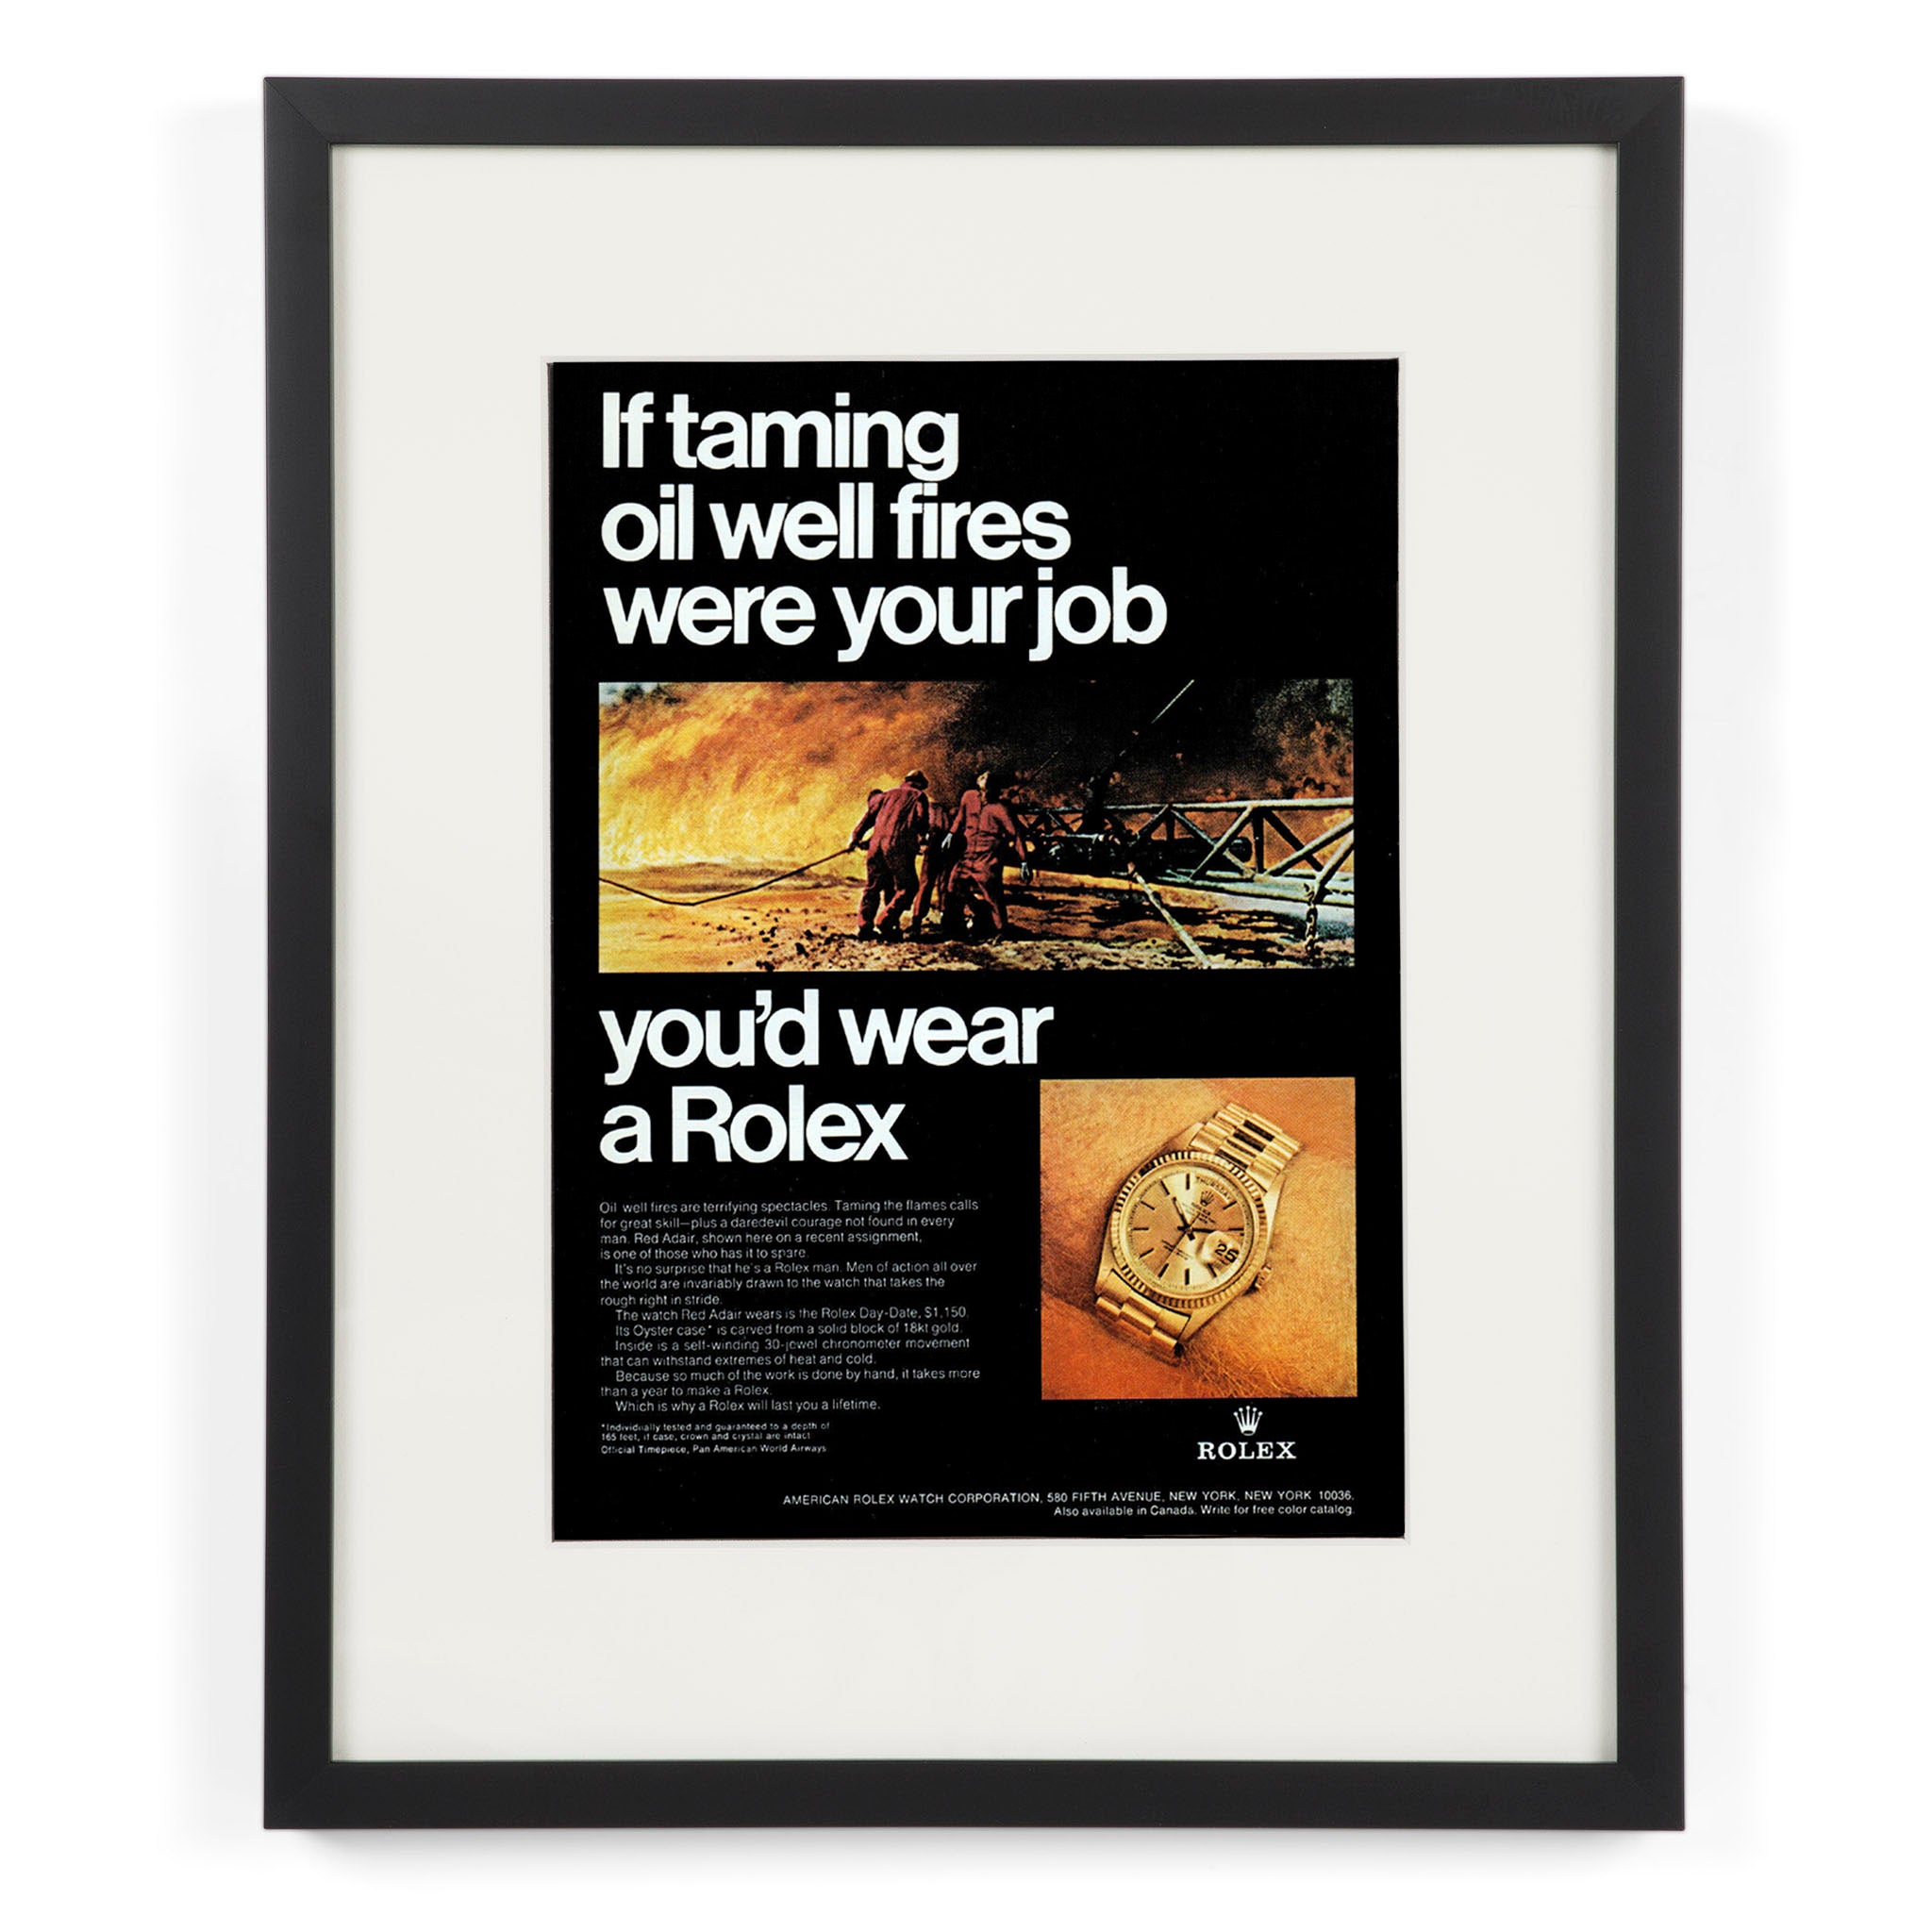 Framed Rolex Taming Oil Well Fires Ad